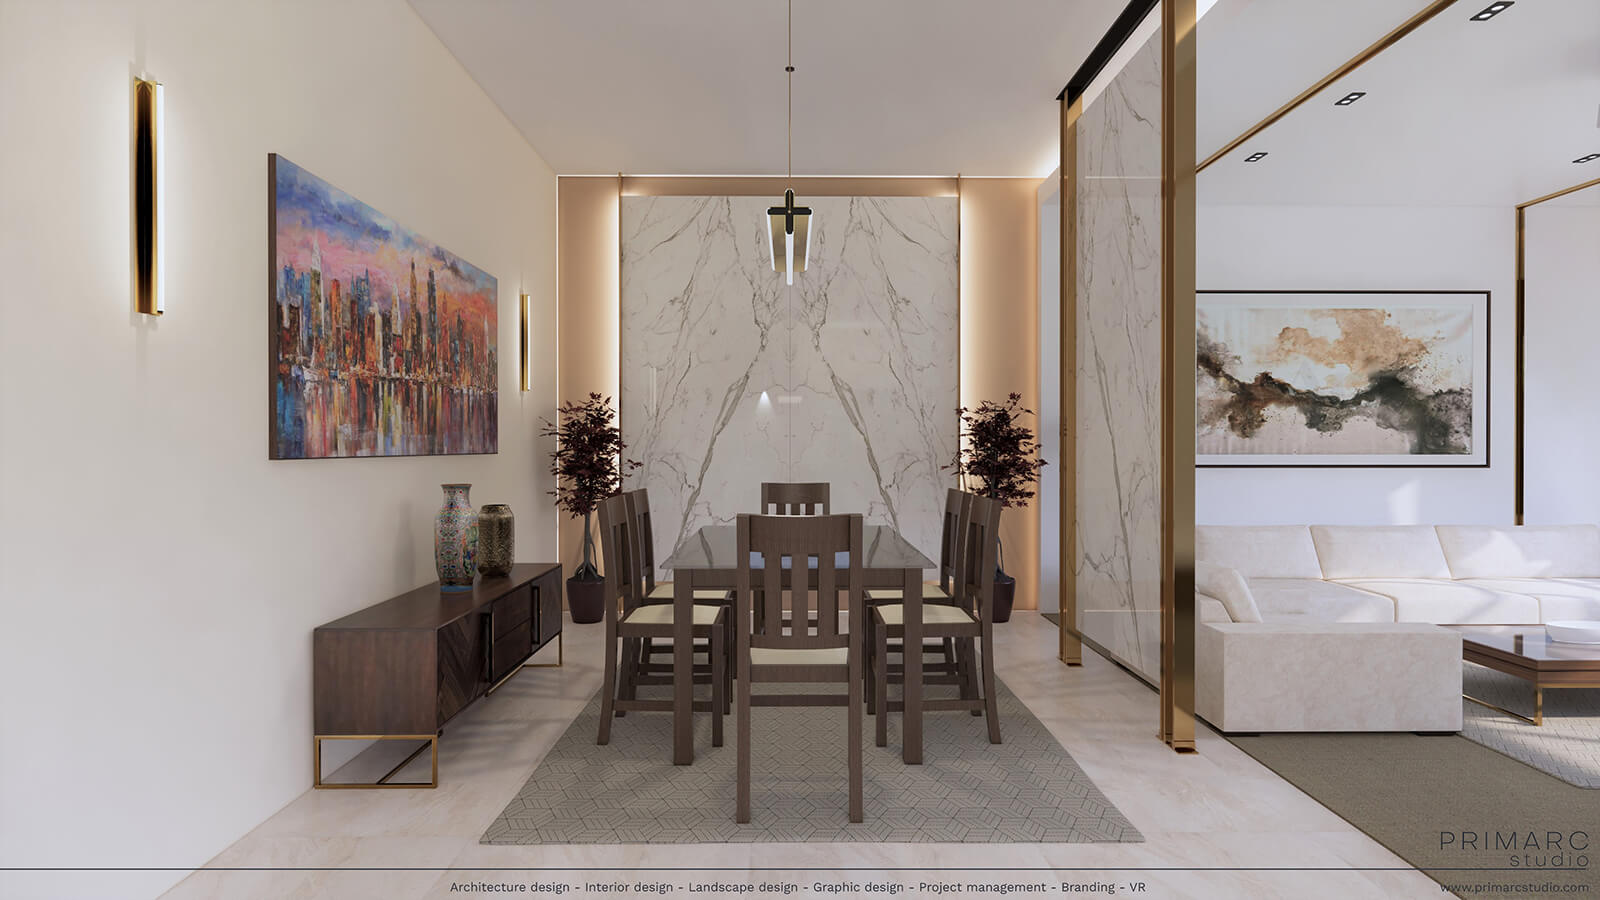 Interior Design of Dining room with free standing marble wall and dining room on the opposite side.